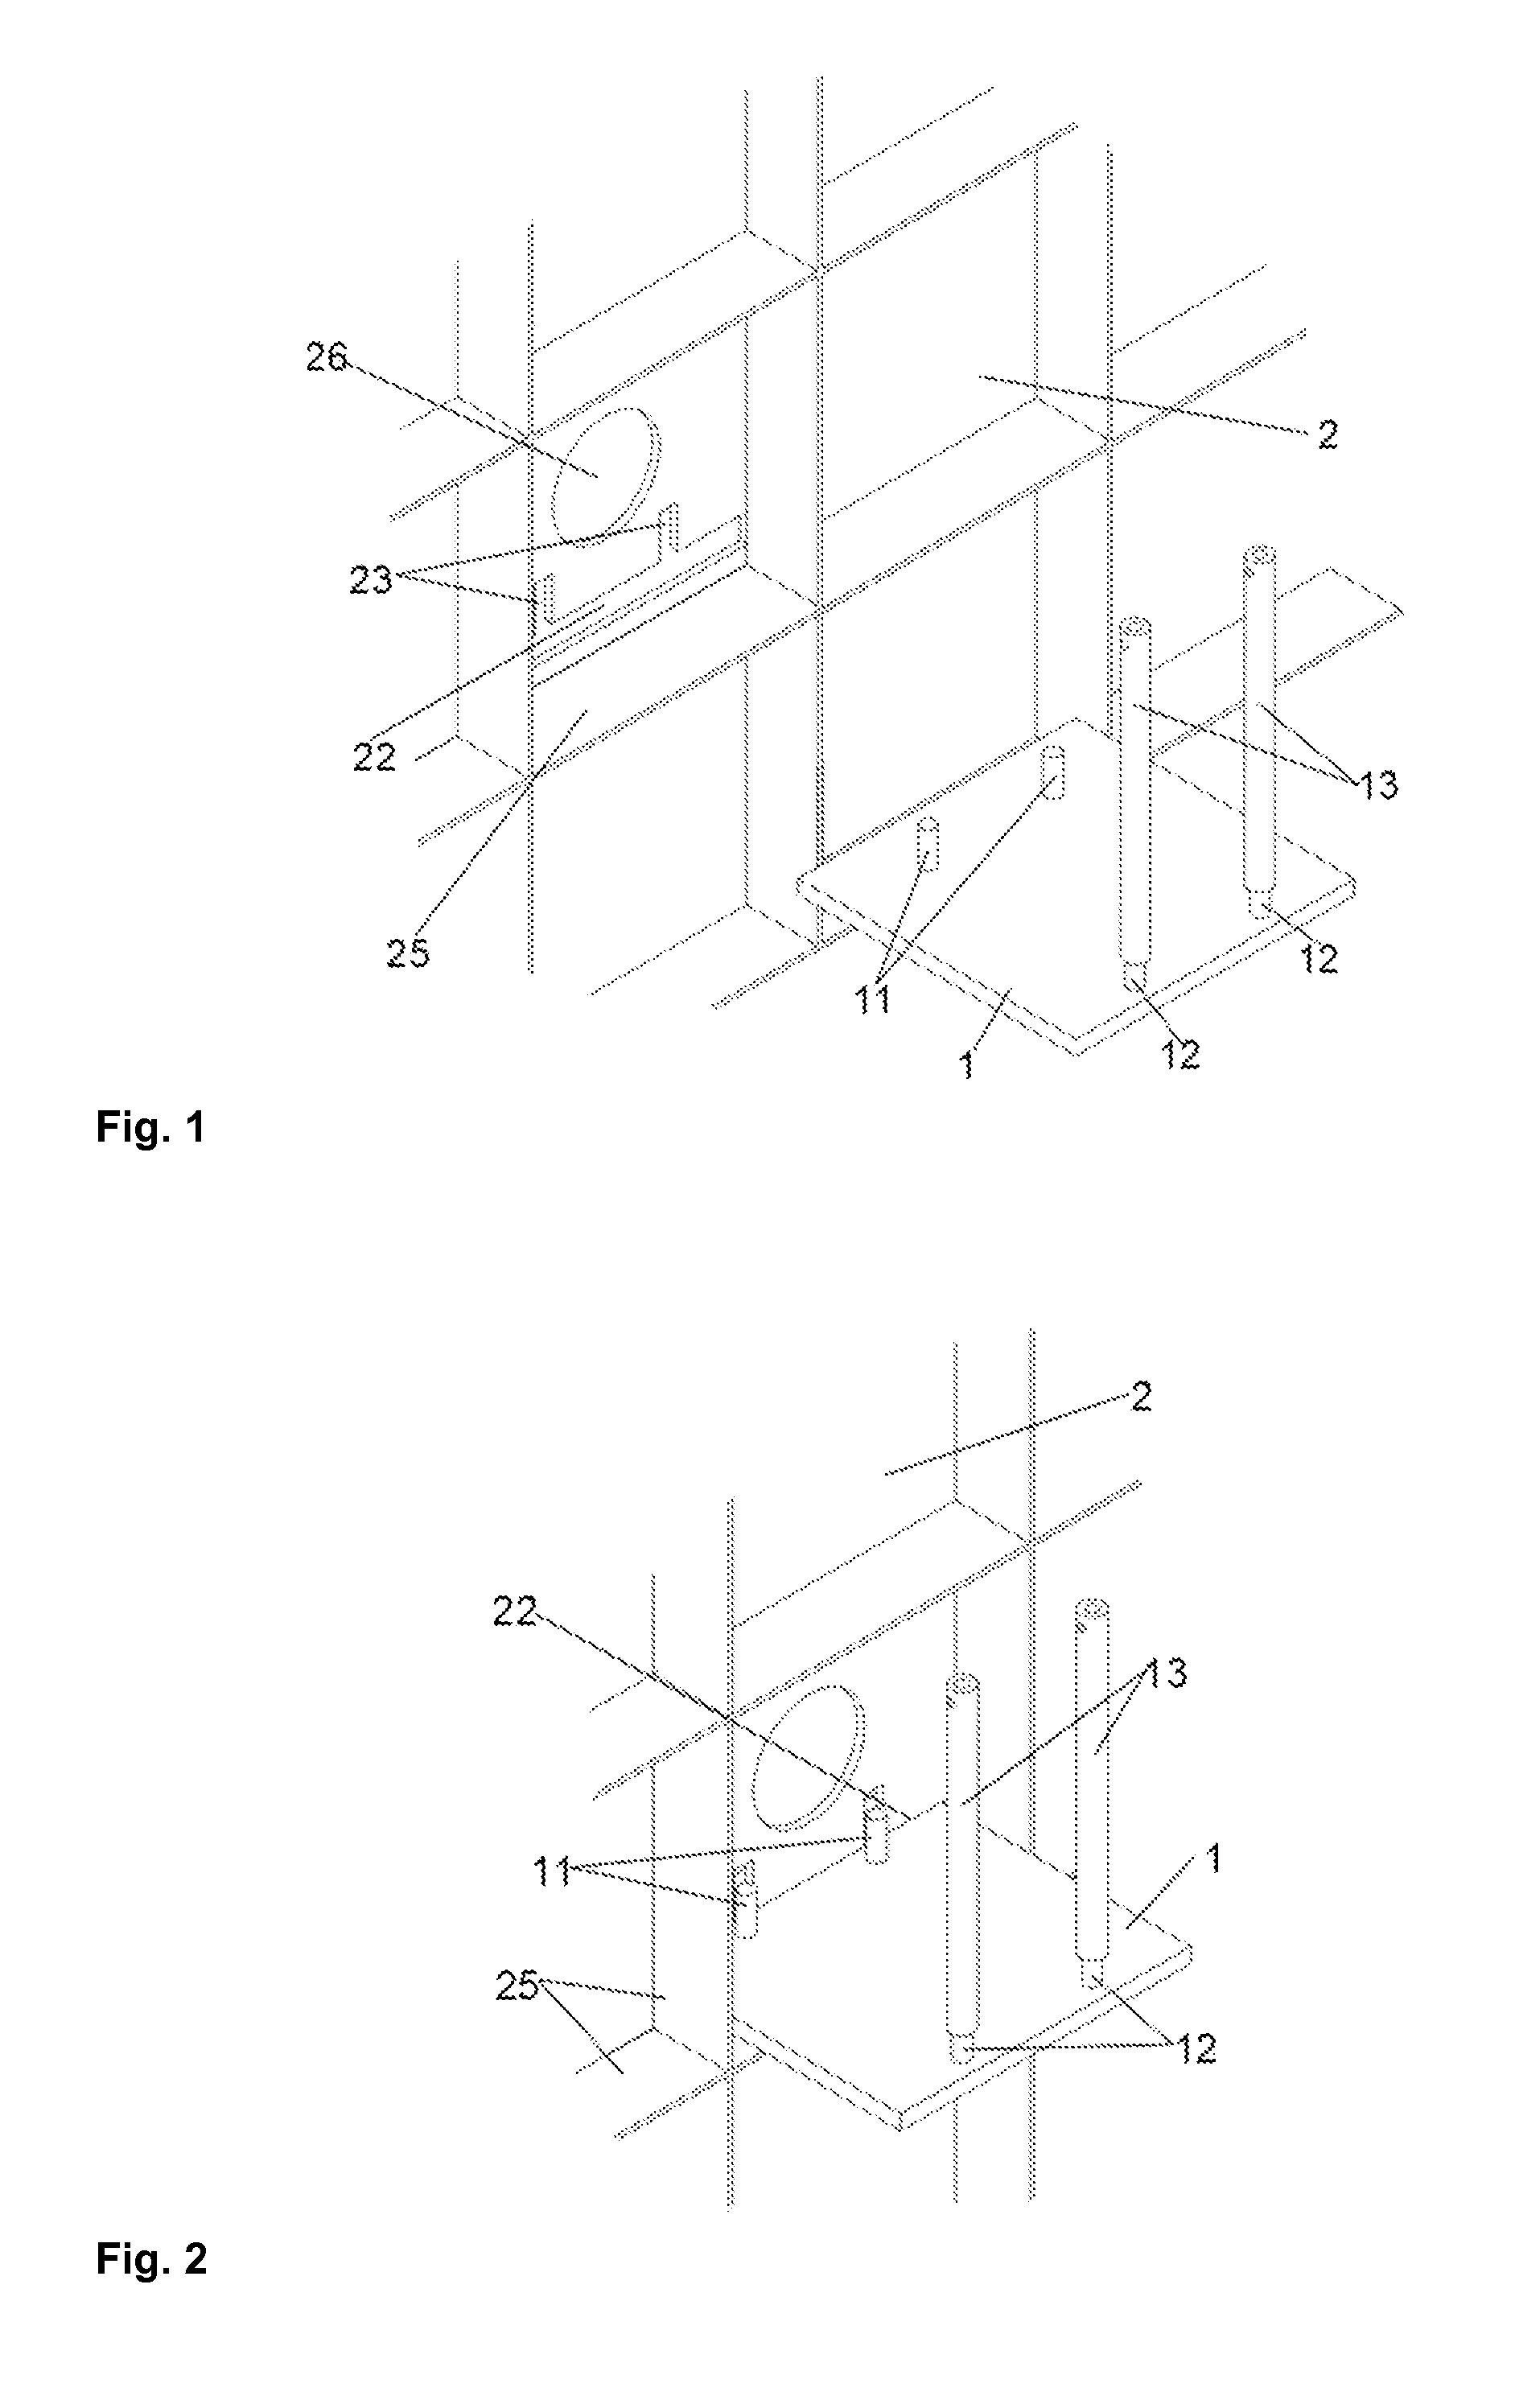 Wall for receiving wear plates and method for replacing wear plates